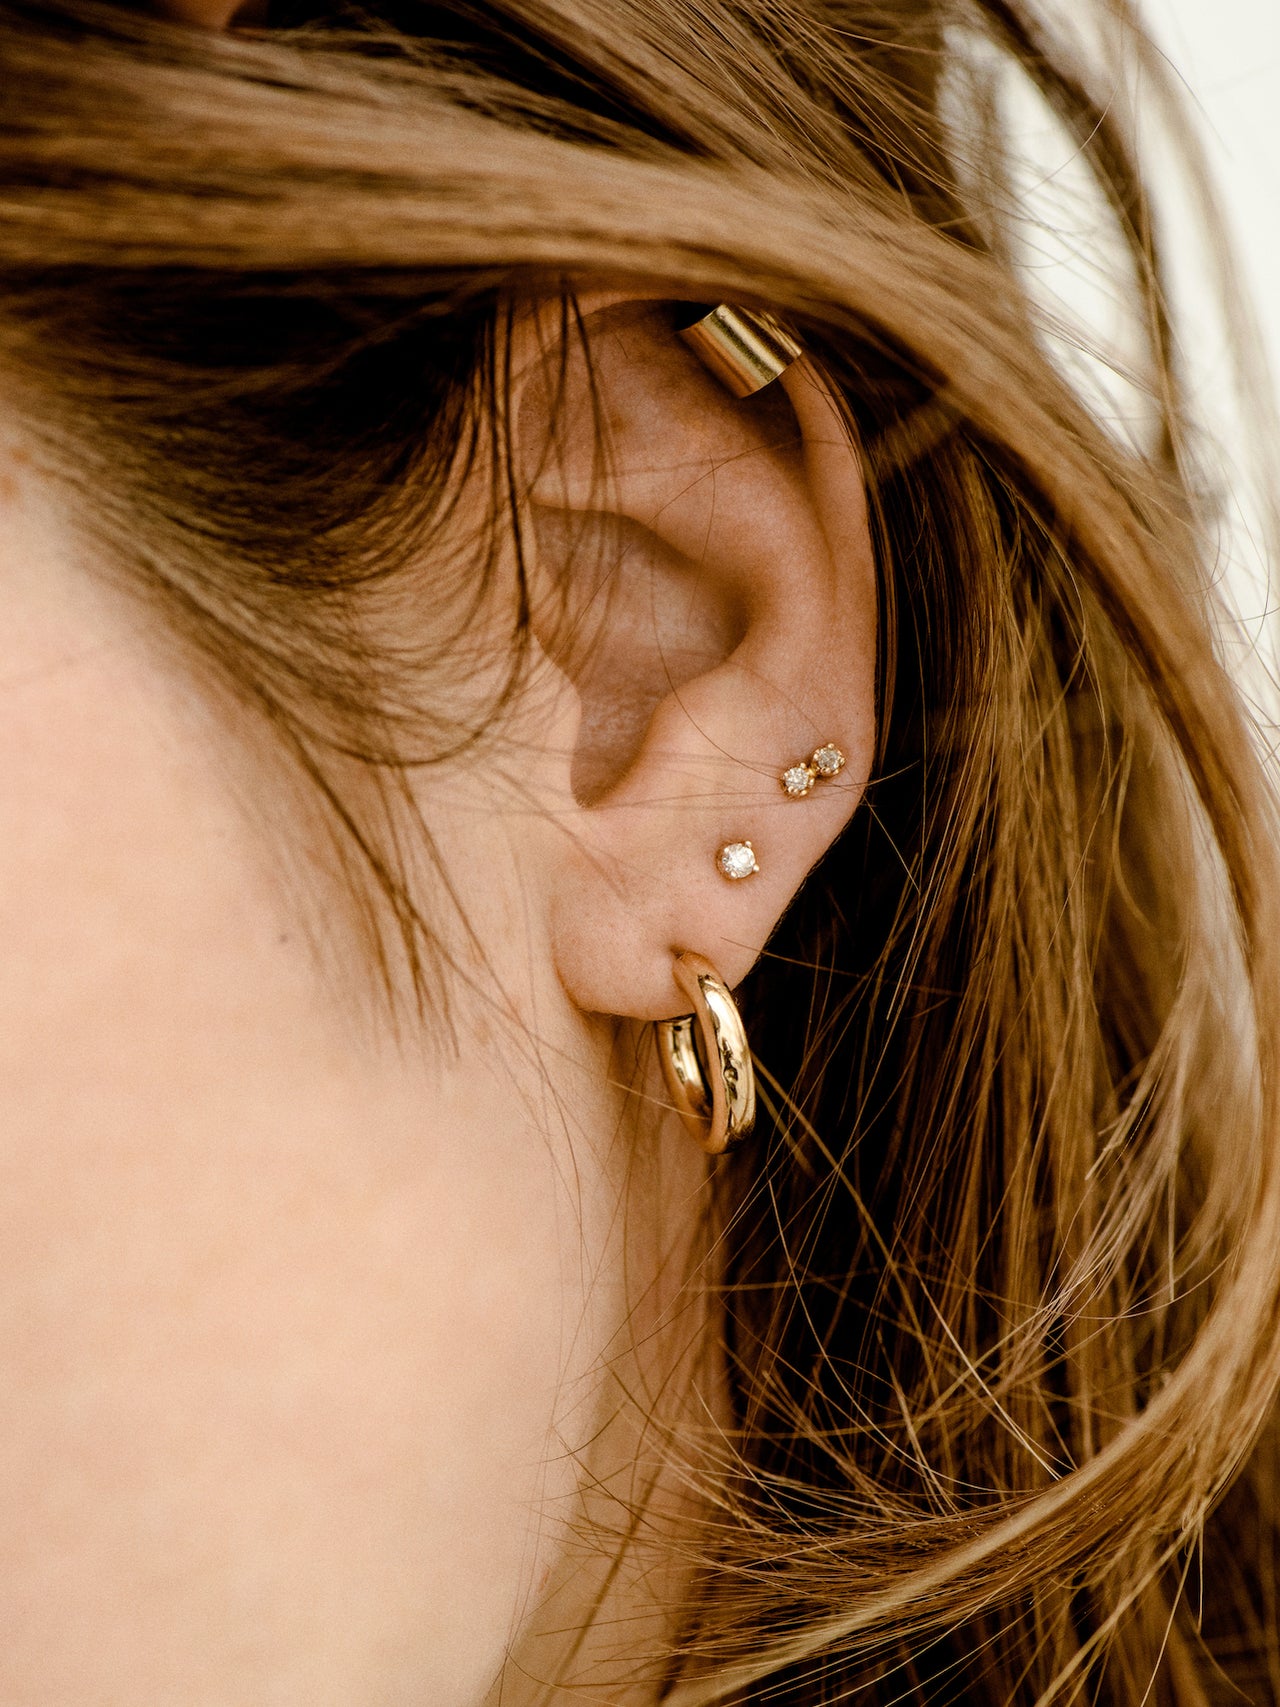 14kt Yellow Gold Ear Cuff pictured on models top ear lobe. 